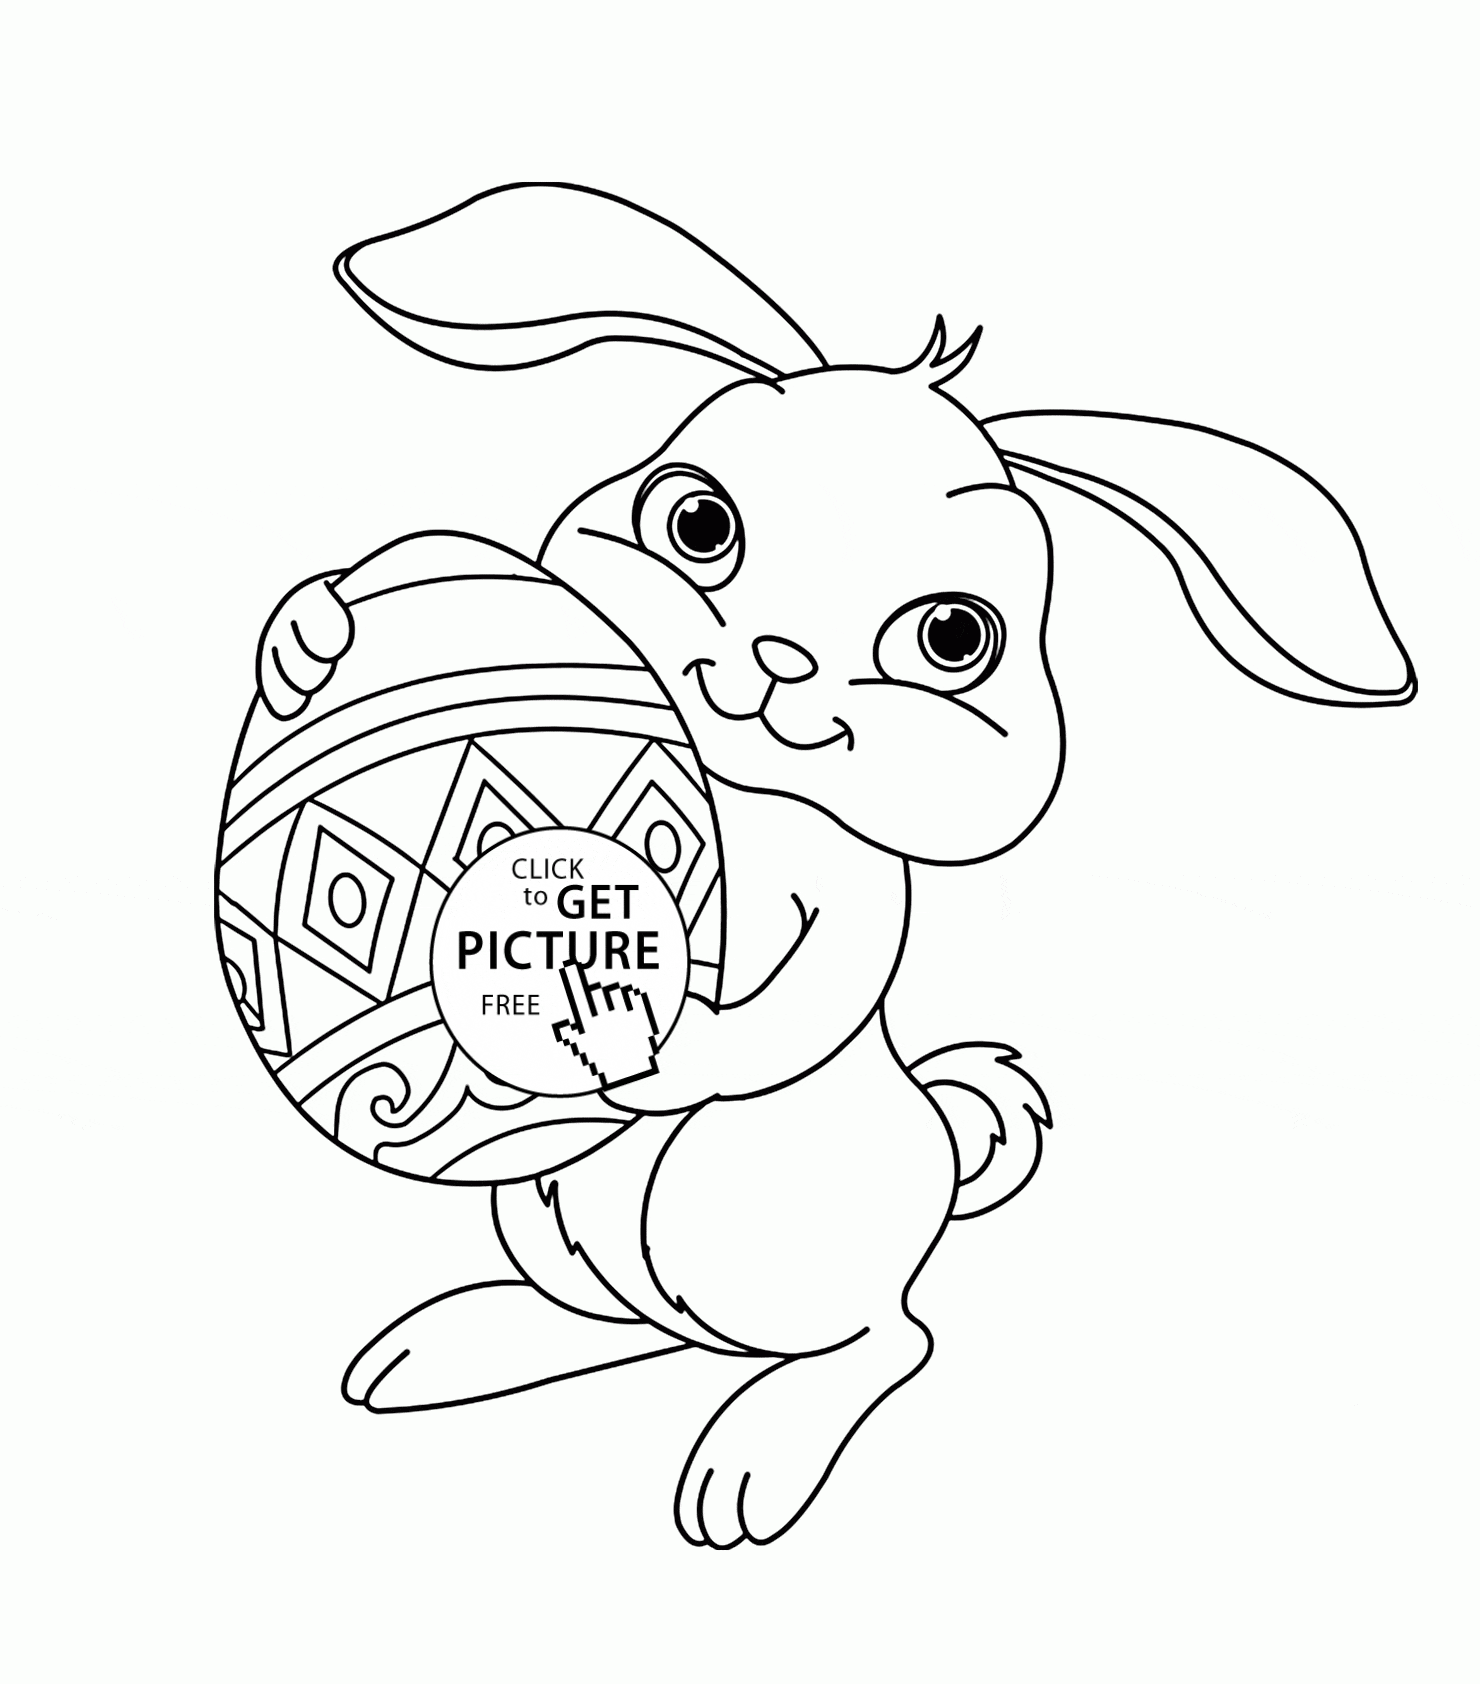 Cute Easter Bunny For Kids Coloring Page